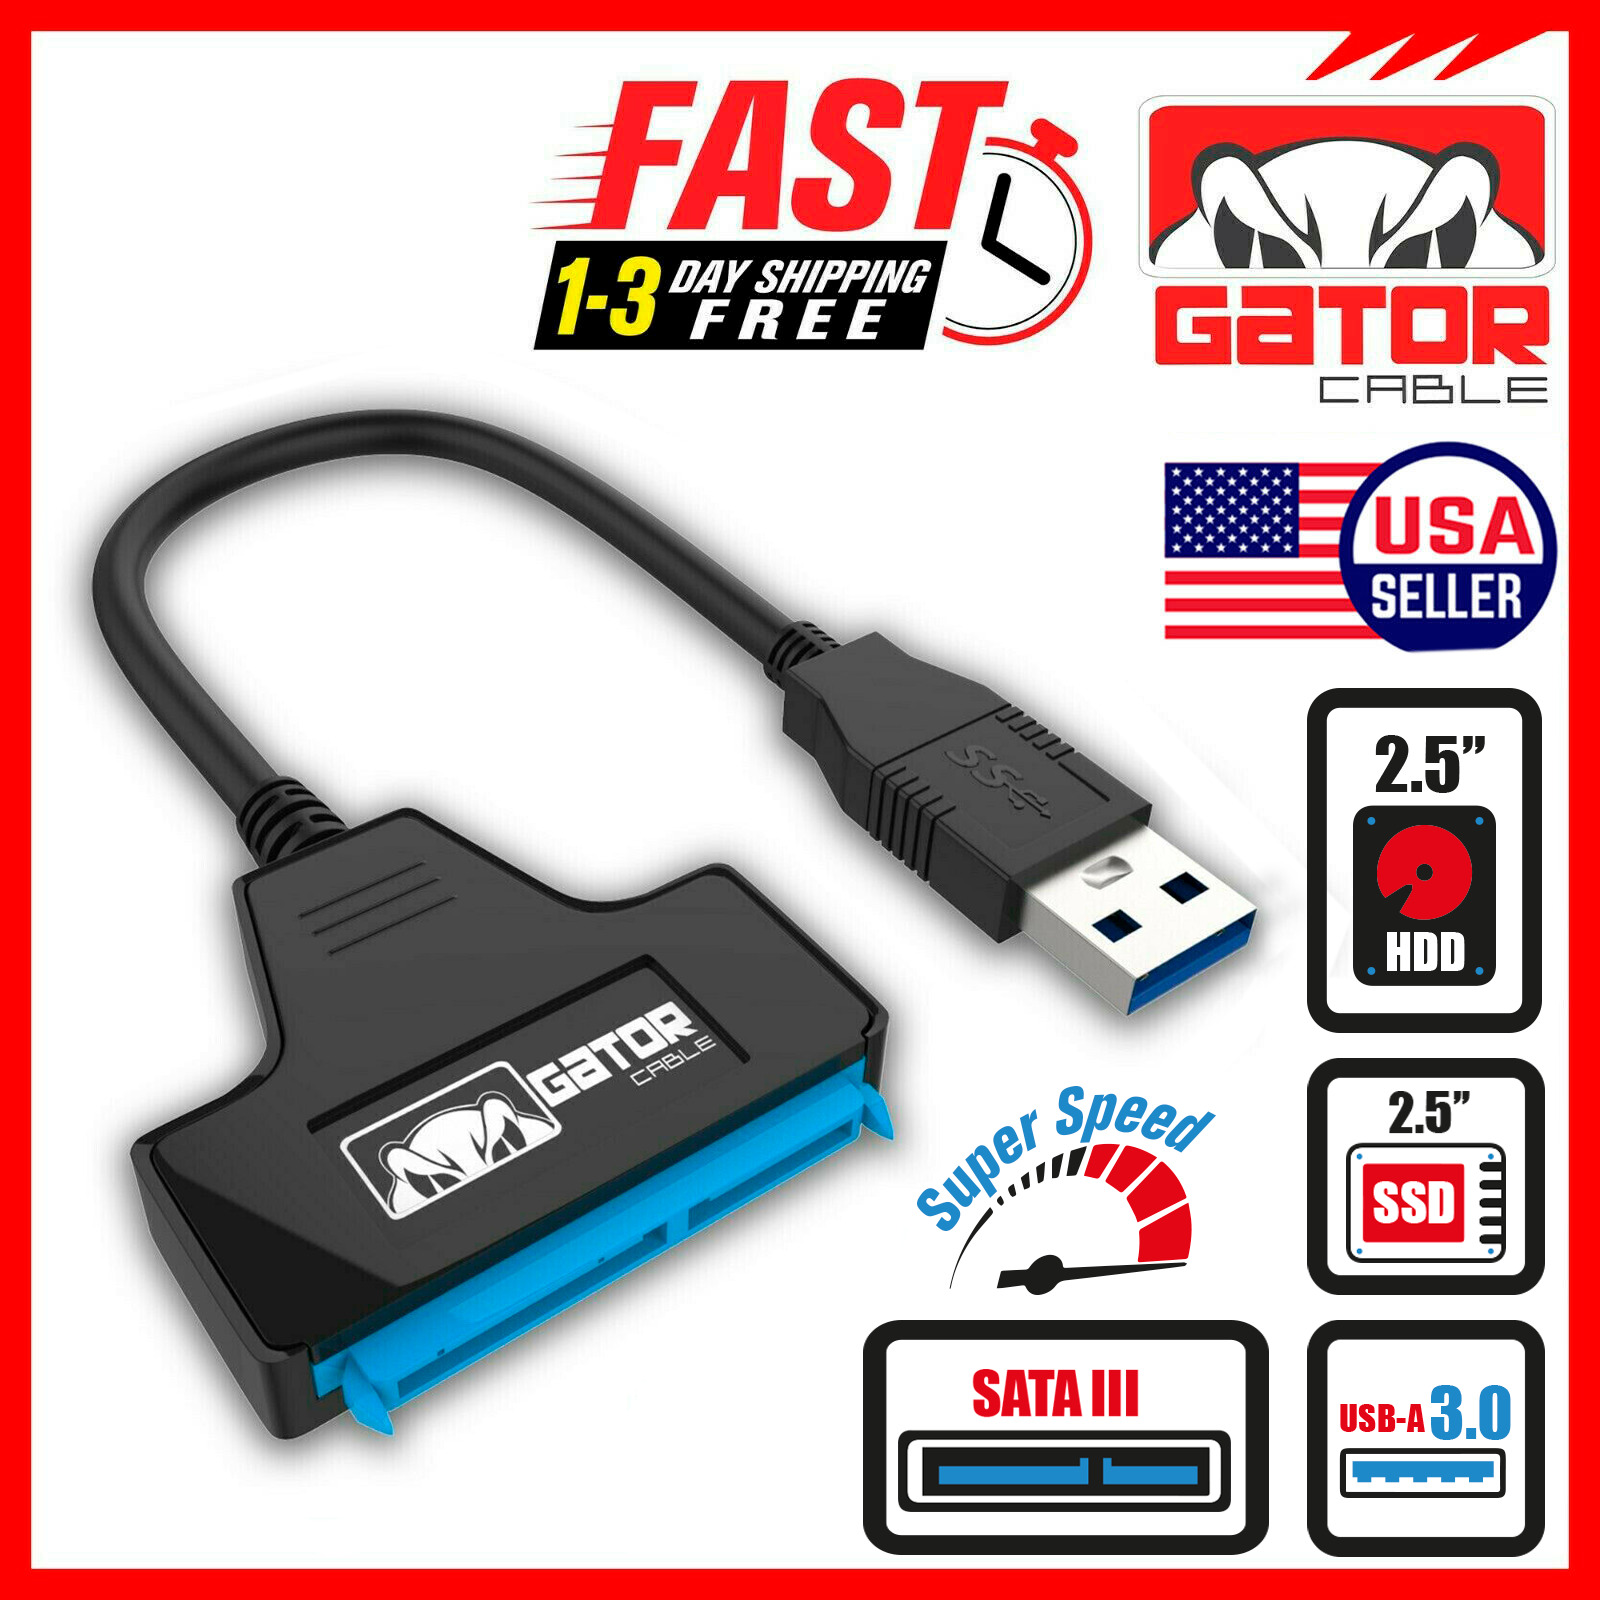 USB 3.0 to SATA III Hard Drive Adapter Converter Cable 2.5" HDD SSD UASP Powered